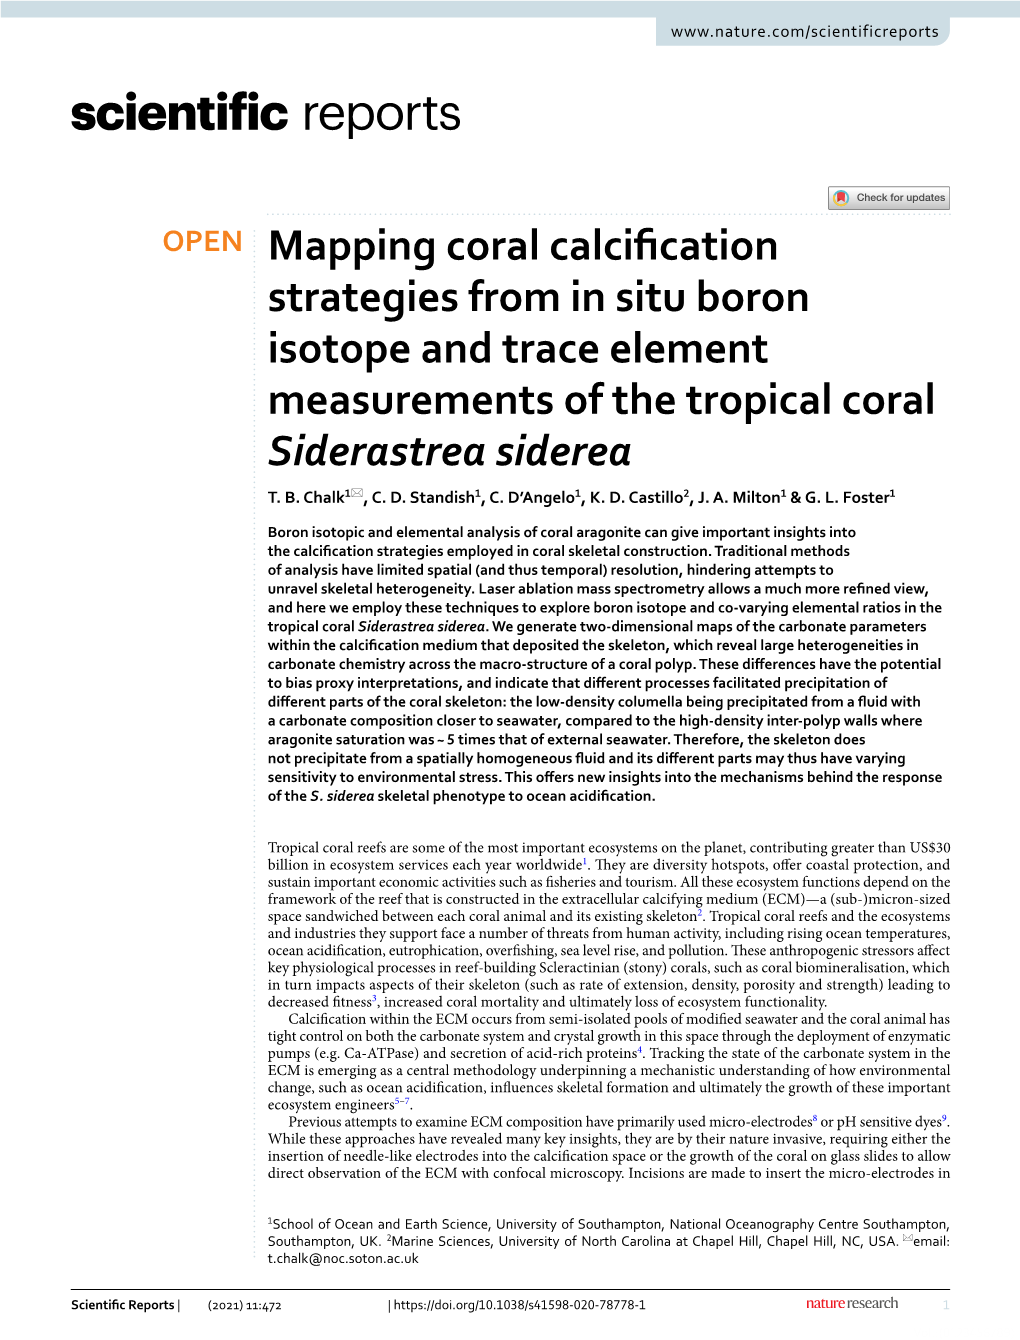 Mapping Coral Calcification Strategies from in Situ Boron Isotope and Trace